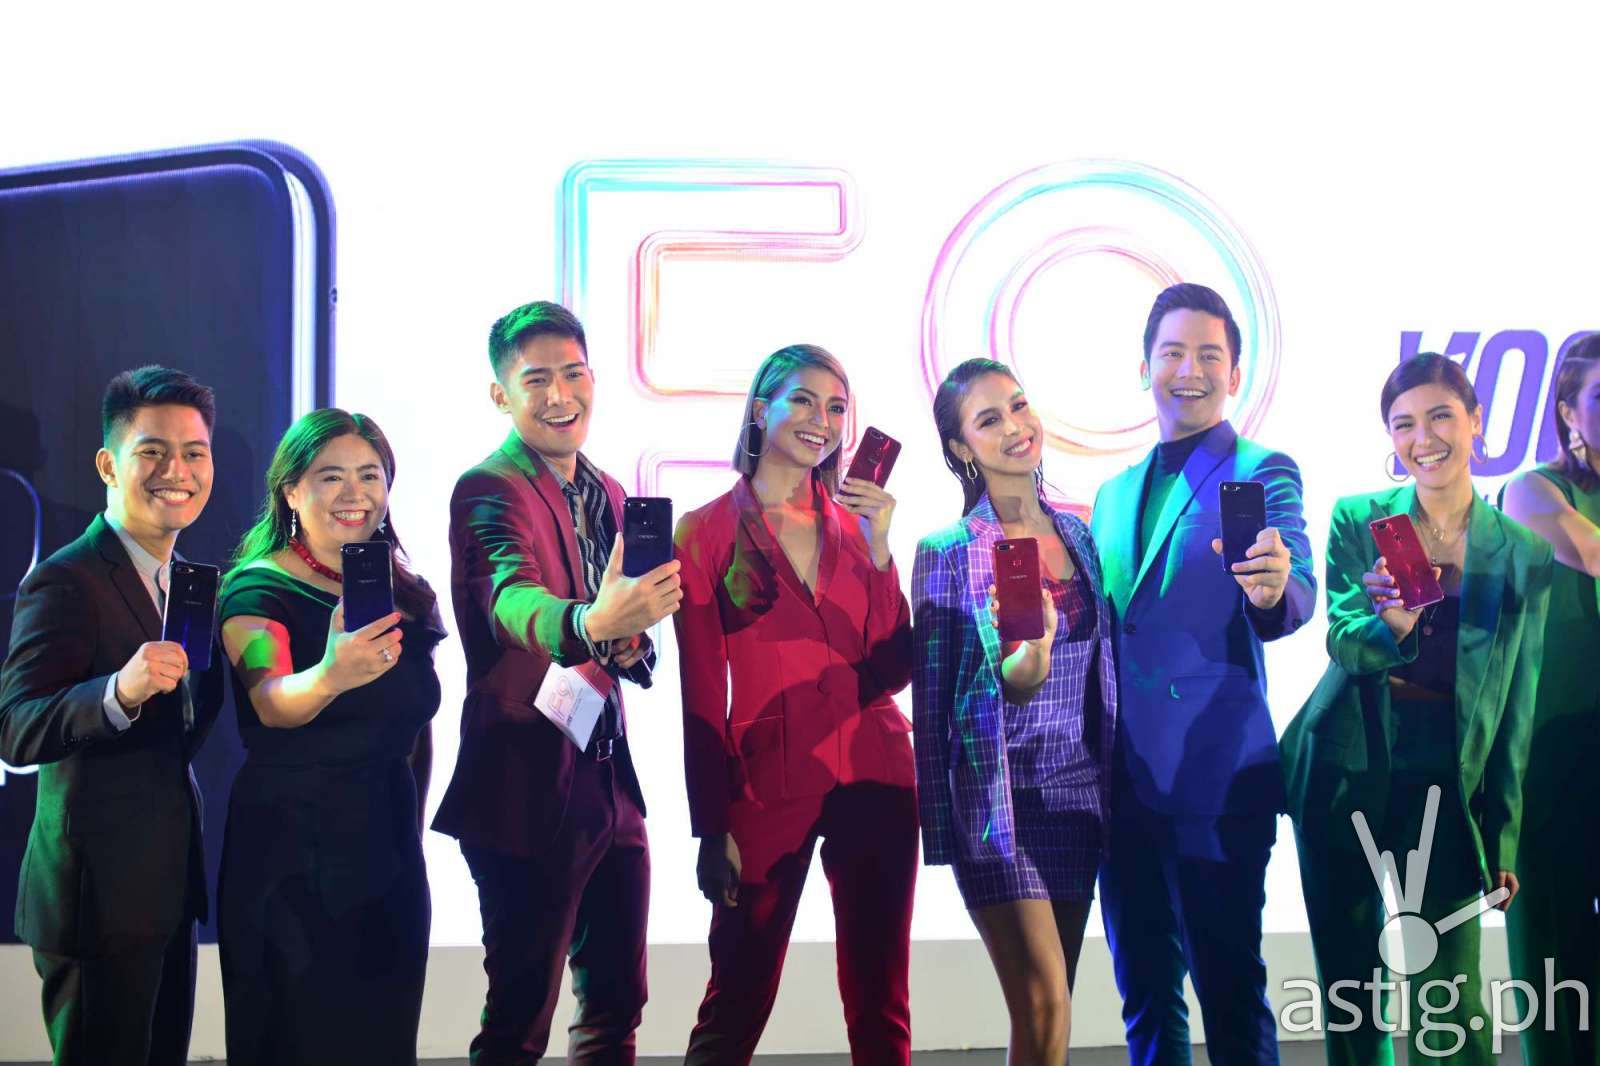 Jane Wan with Julia Barretto and other celebrity endorsers at the OPPO F9 launch in the Philippines